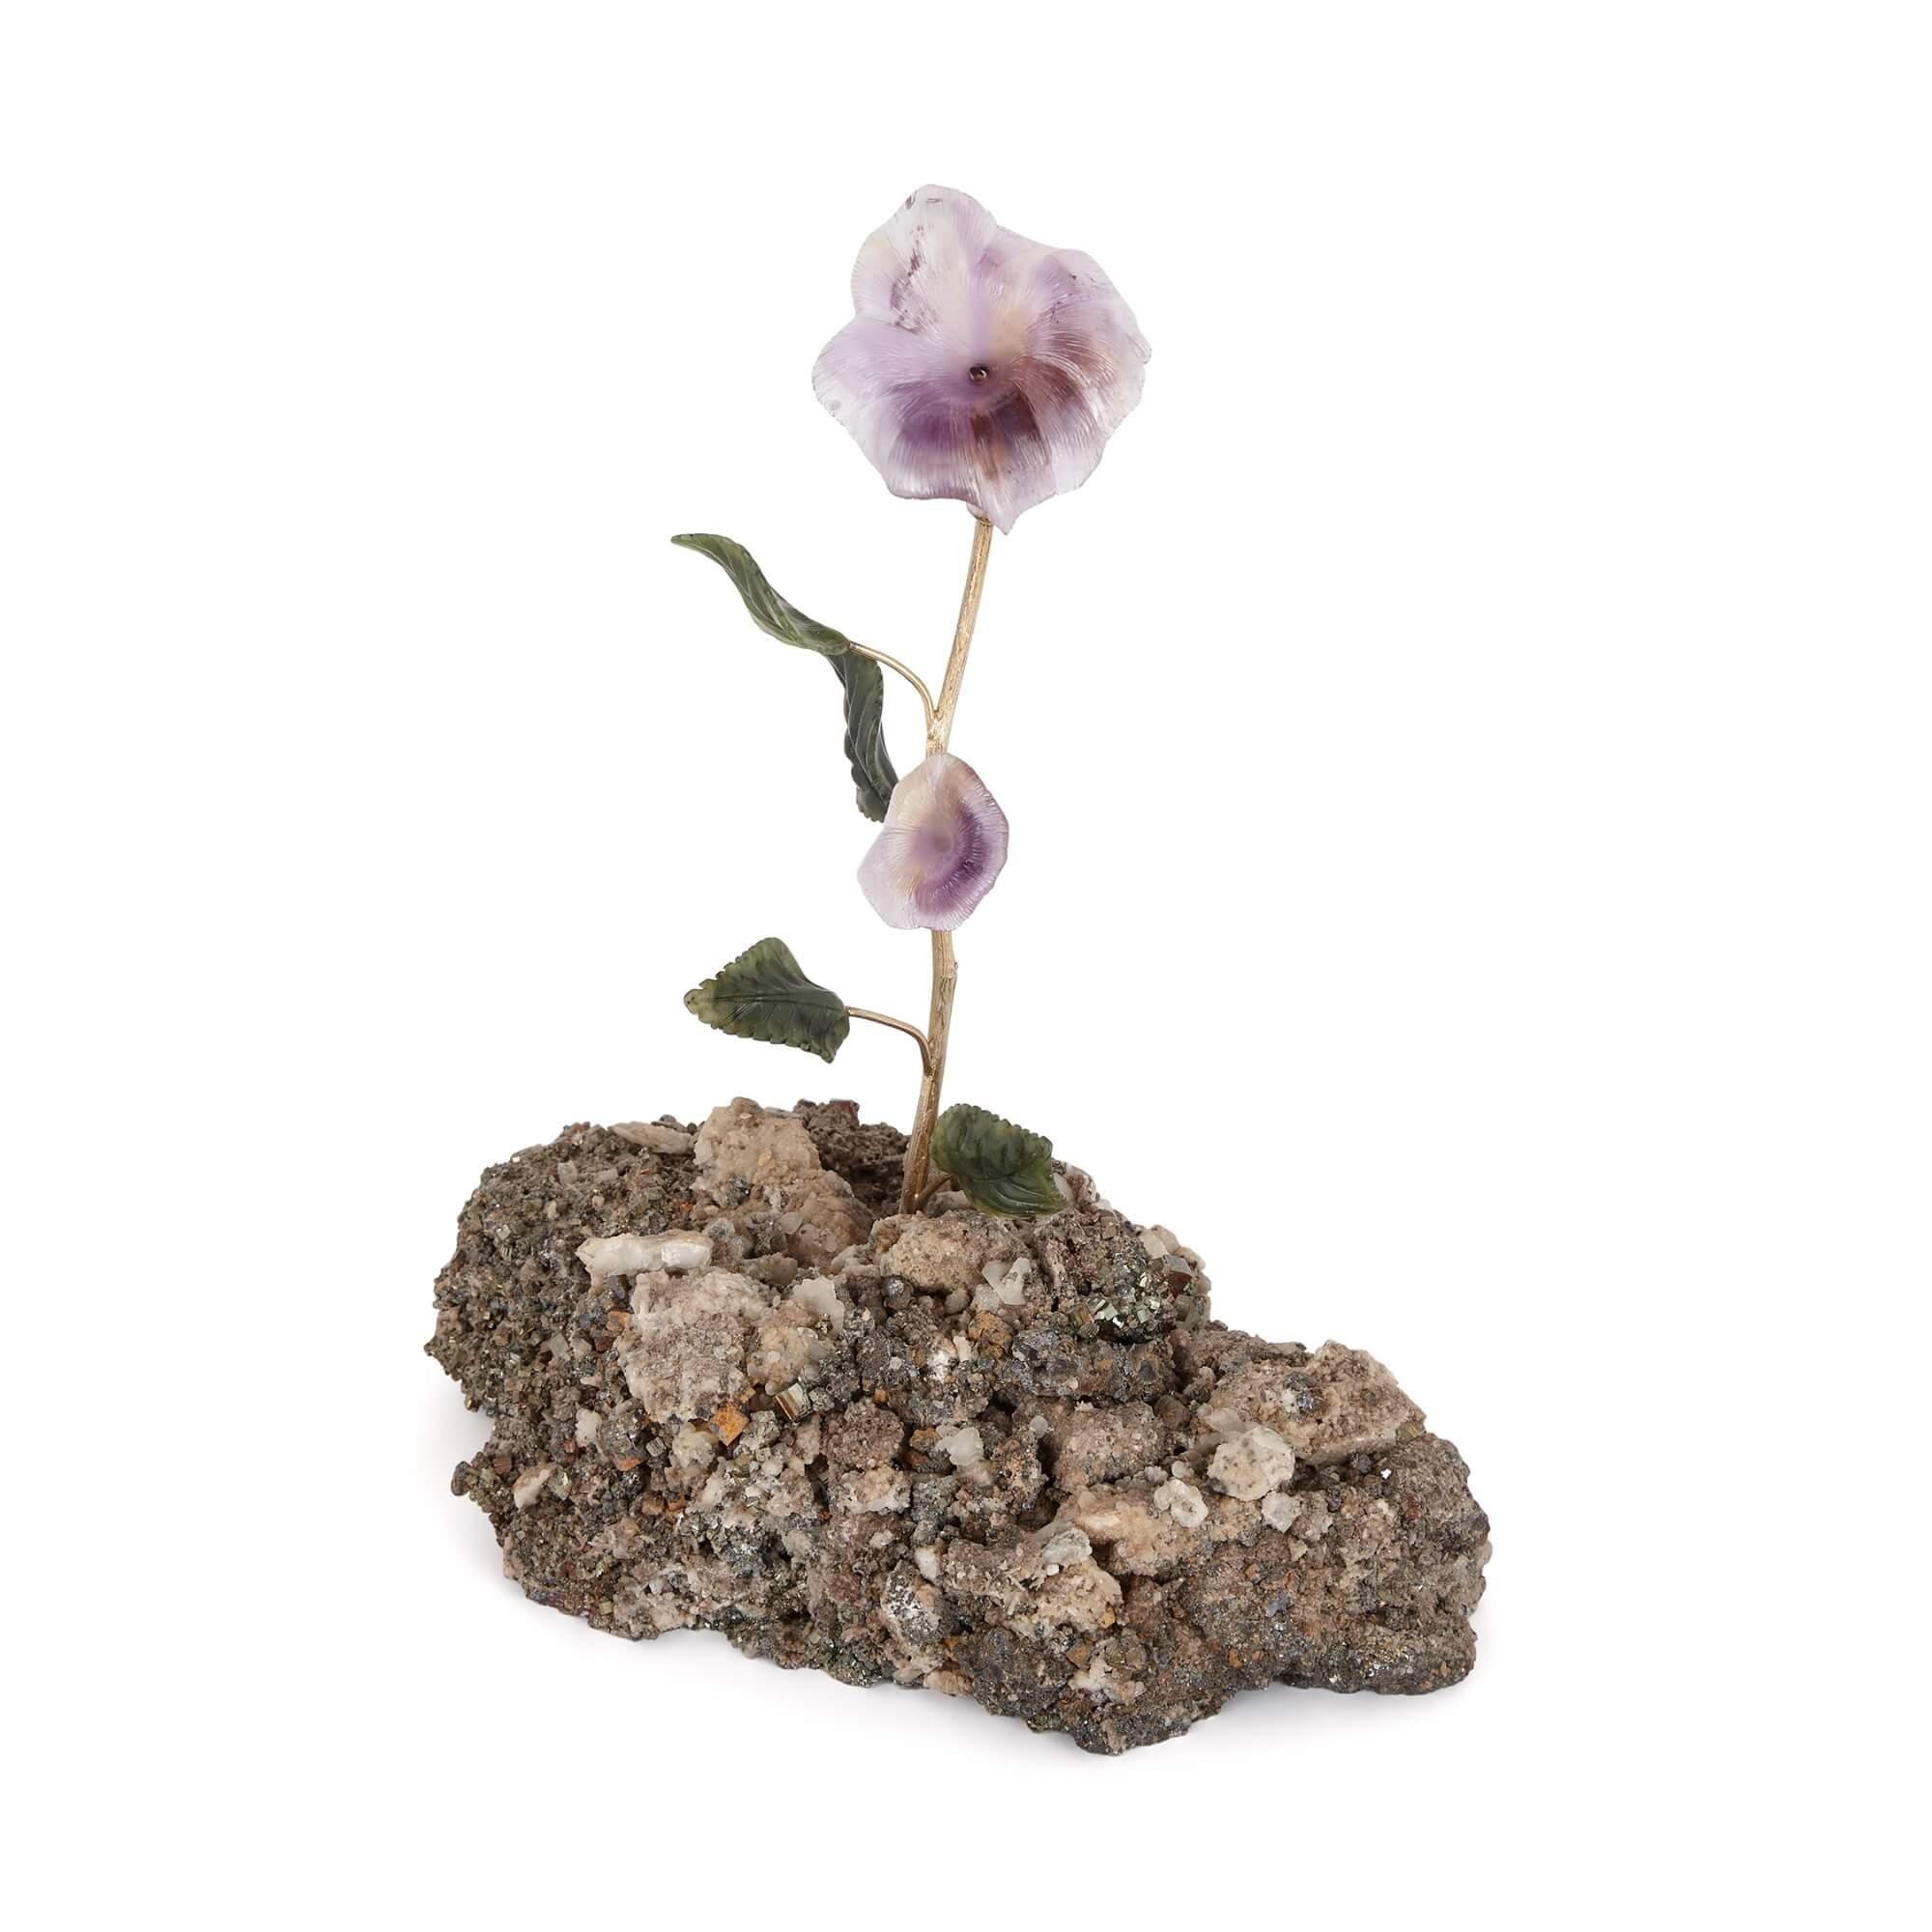 Hardstone, quartz, amethyst, nephrite and silver-gilt flower model
Continental, 20th century
Measures : Height 25cm, width 21cm, depth 12cm.

This exceptional decorative hardstone piece consists of a quartz base applied with an amethyst,